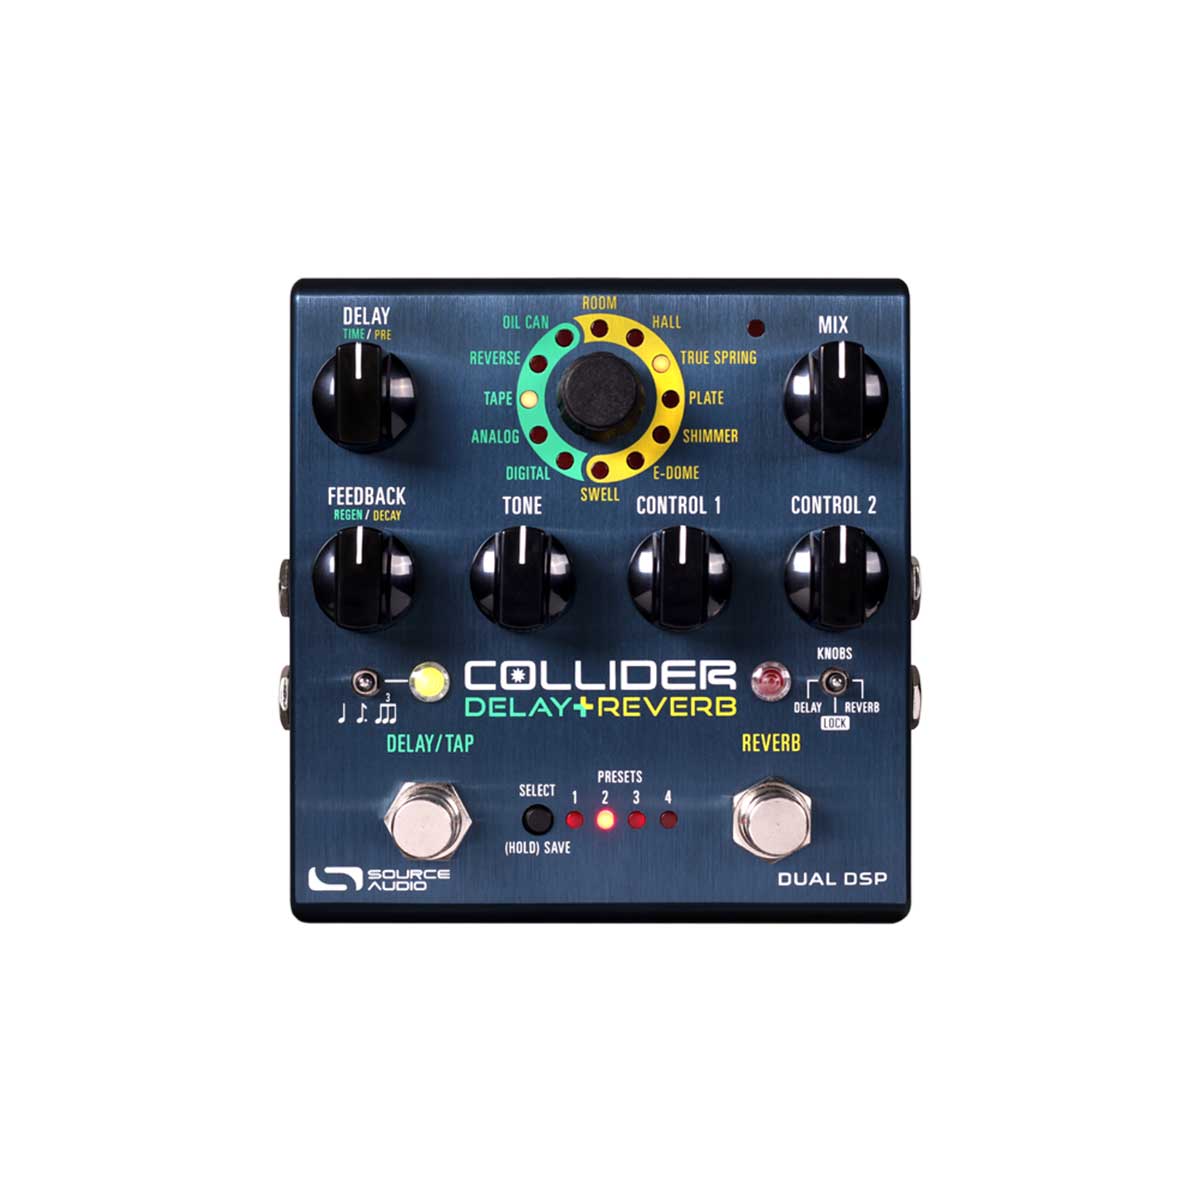 Source Audio One Series Collider Stereo Delay+Reverb